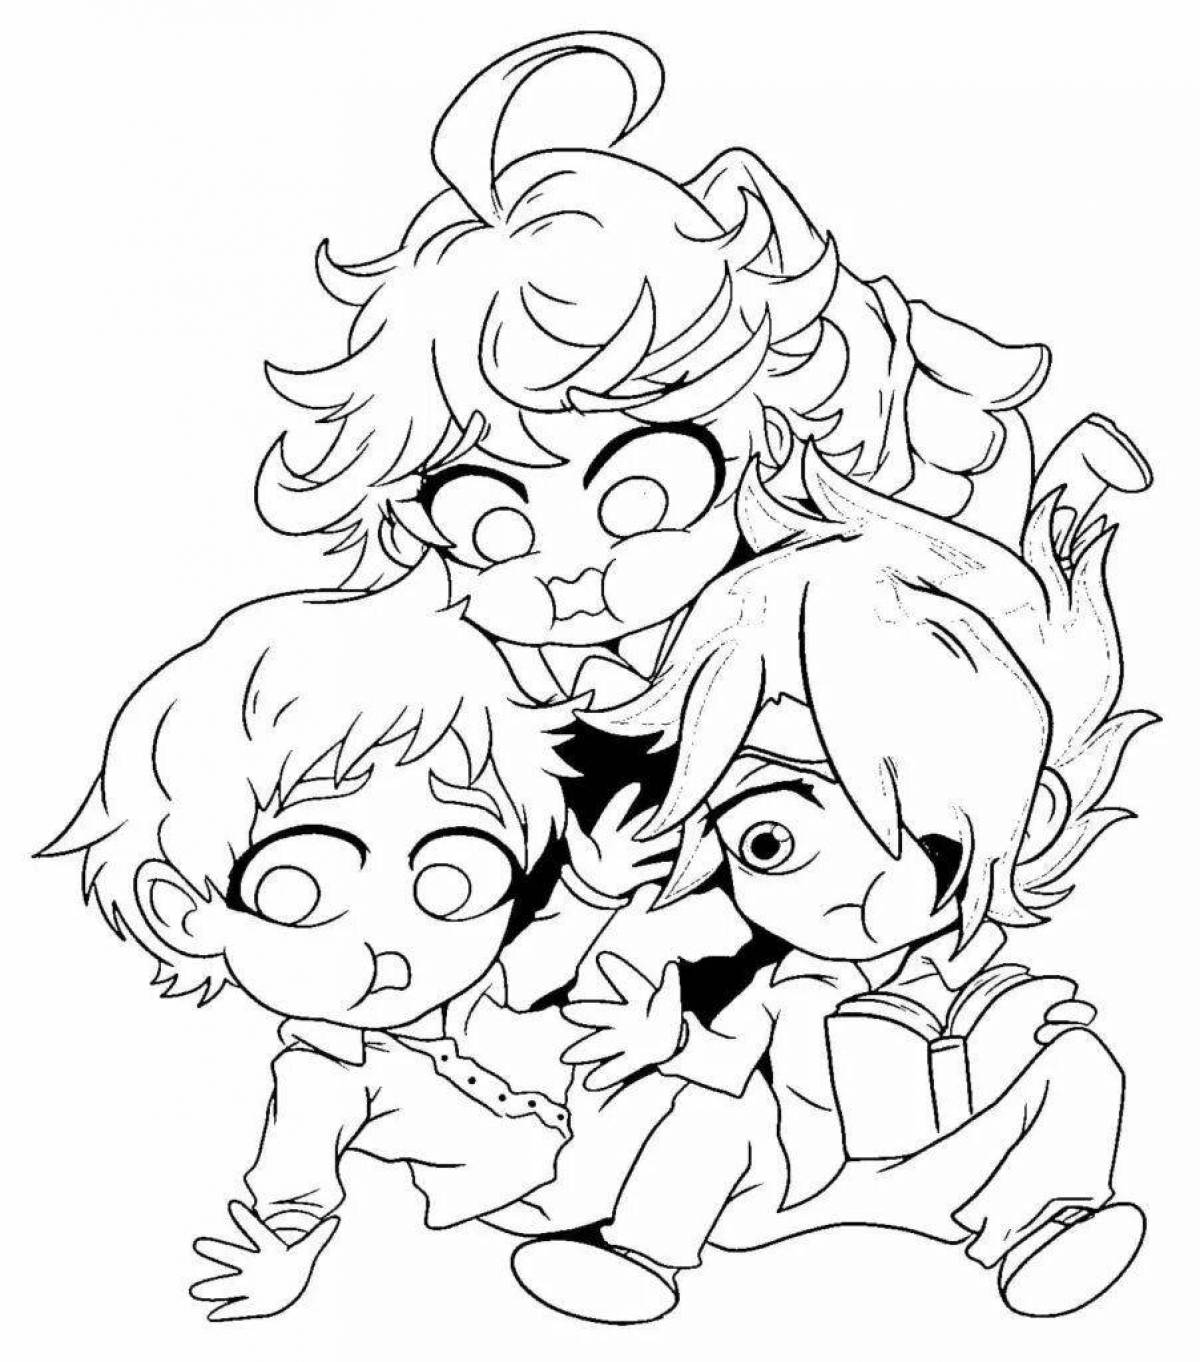 The Promised Neverland funny anime coloring book